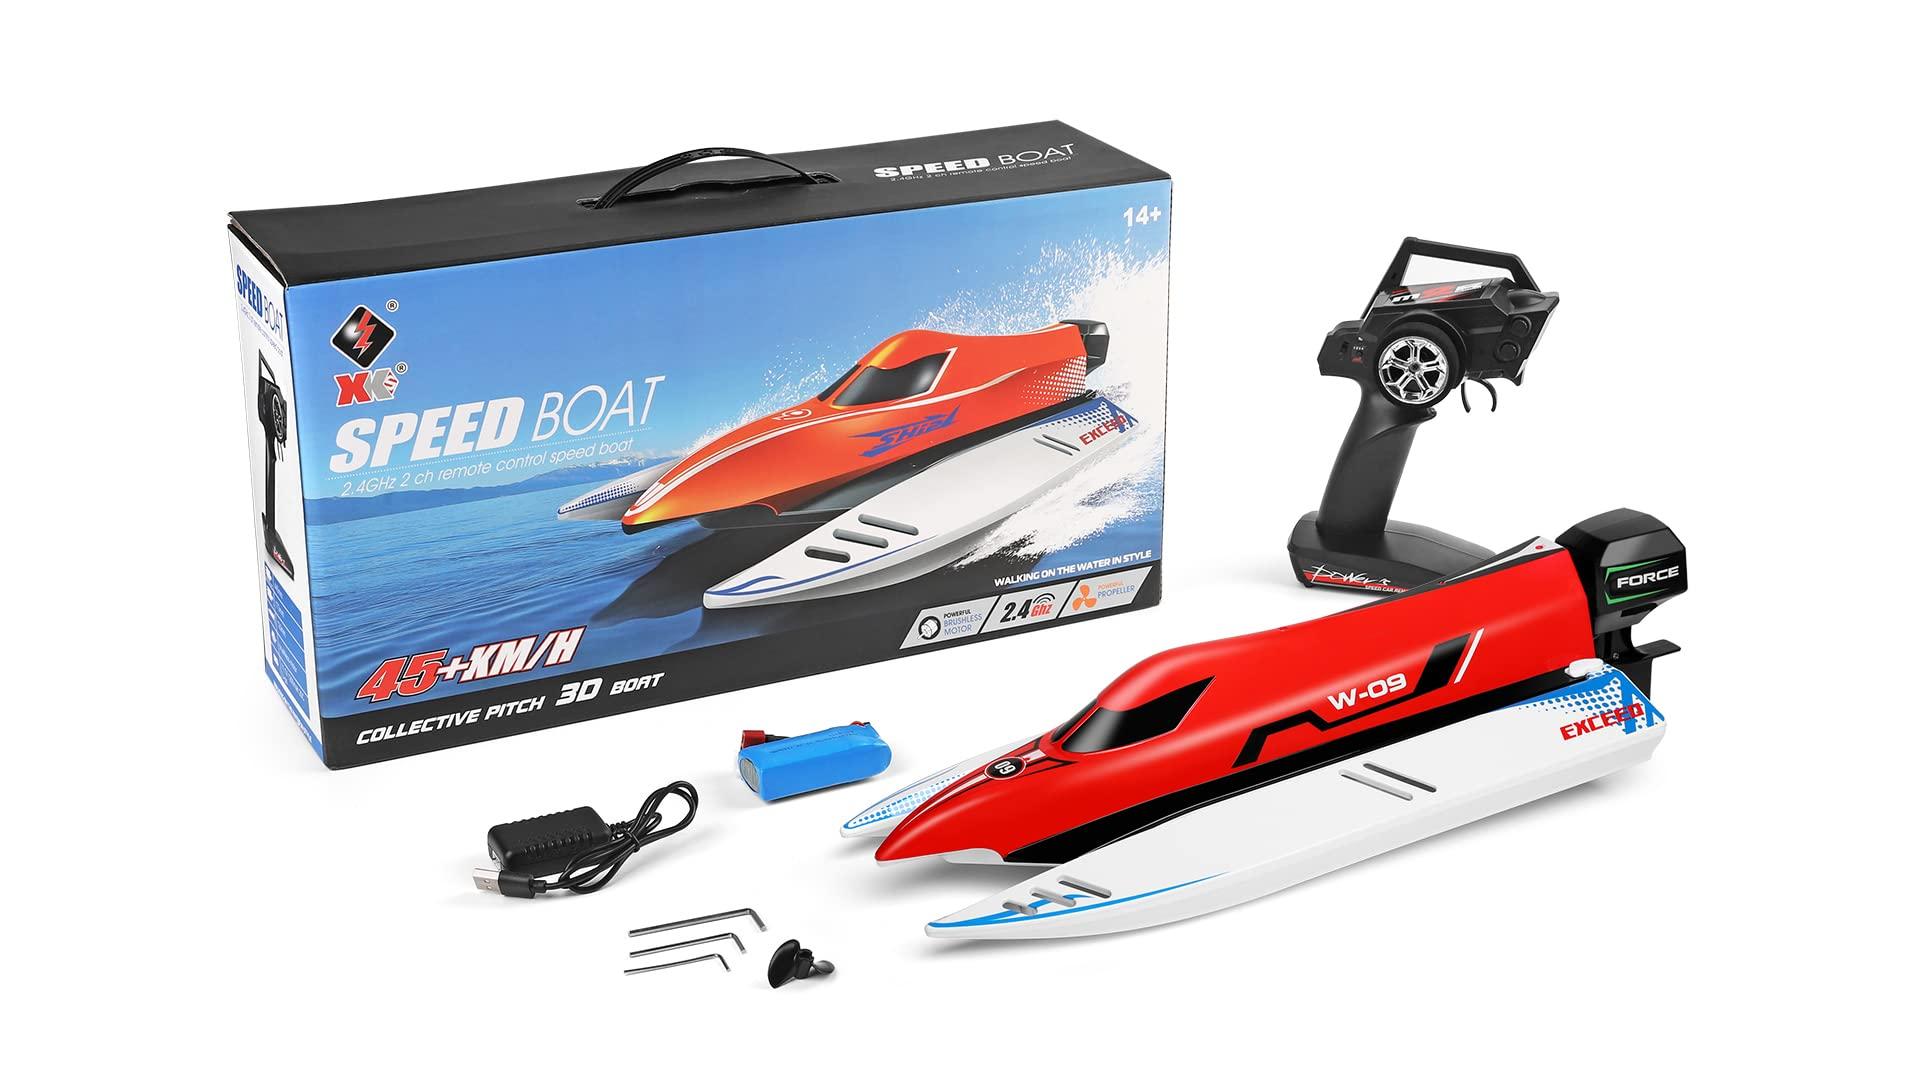 W 09 Rc Boat: Top Speed Performance: The W 09 RC boat and its slick design